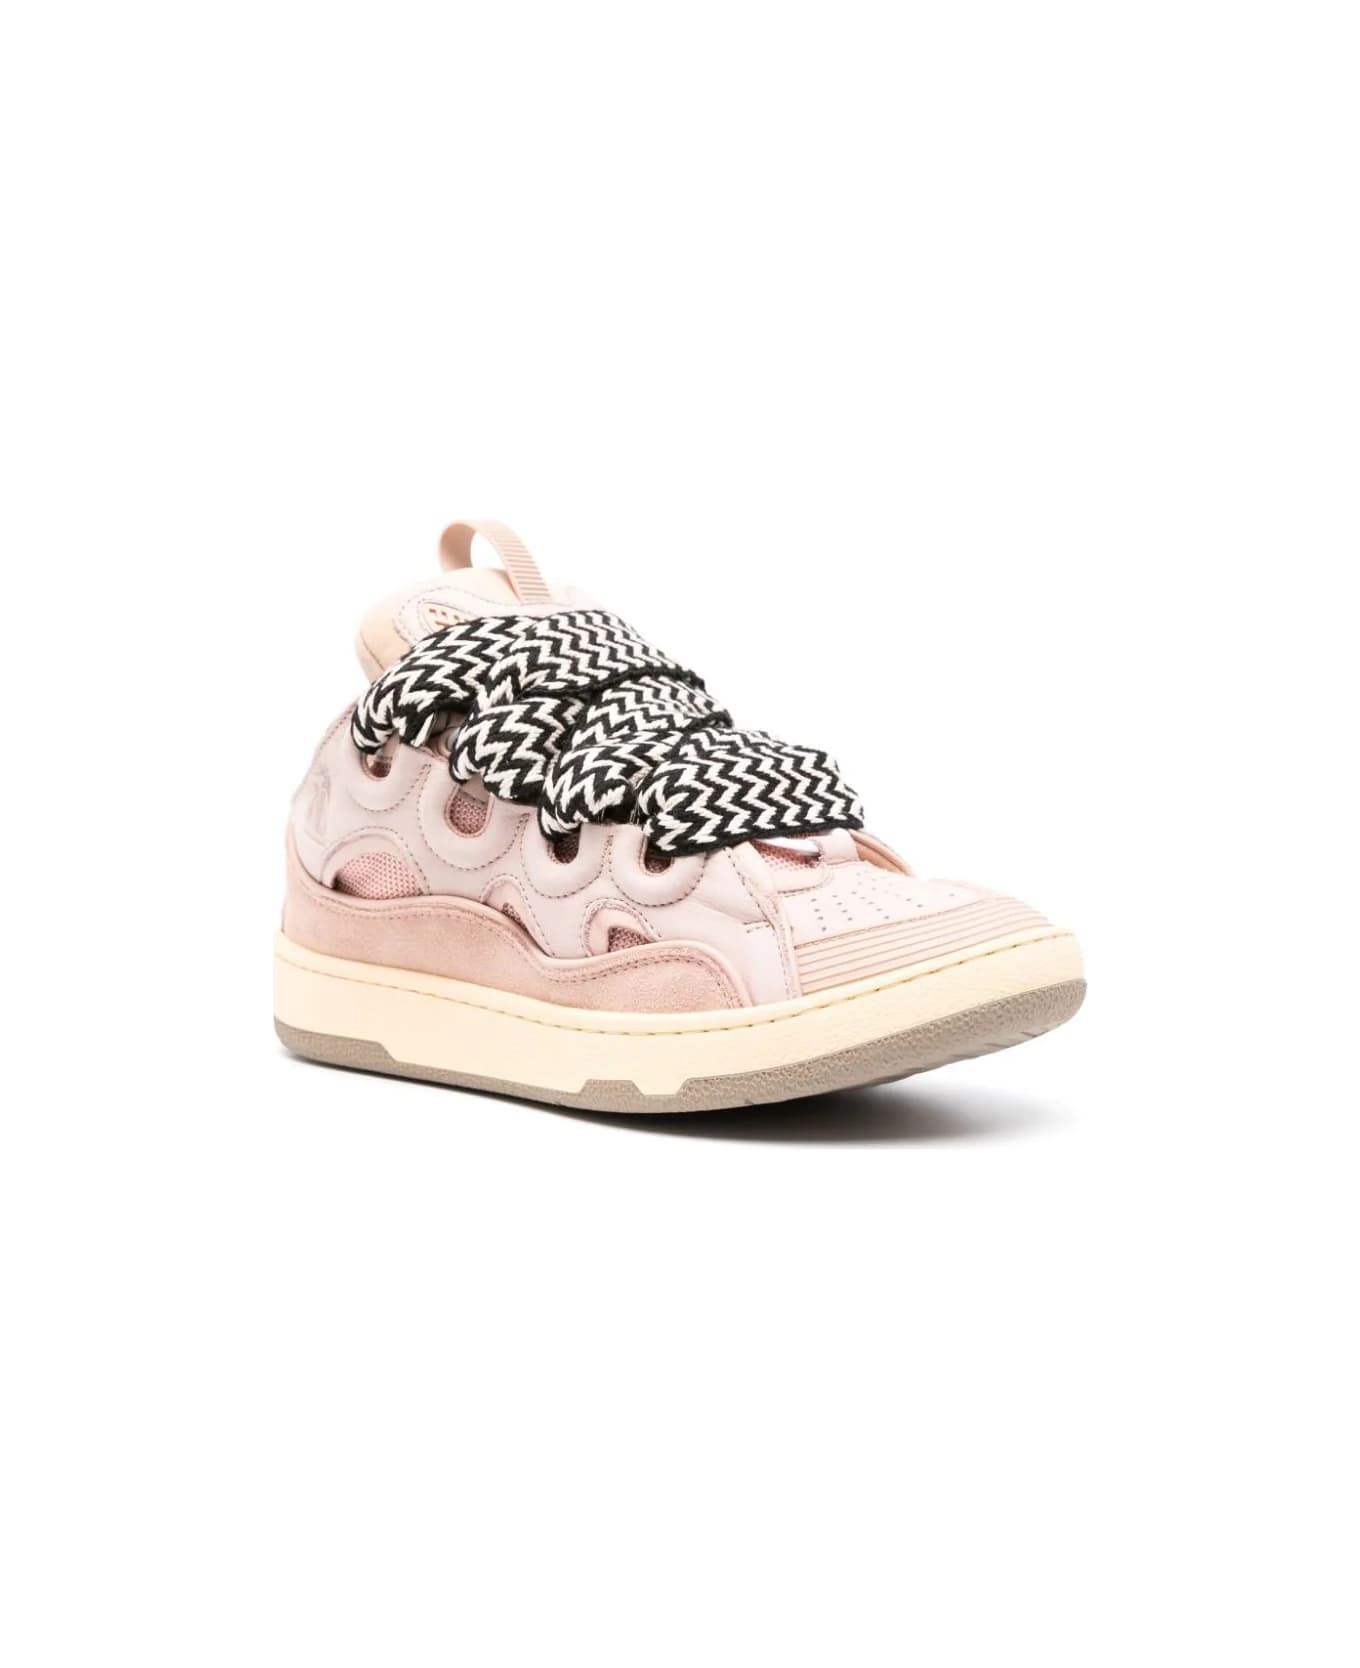 Lanvin Curb Sneakers In Pink Leather - Pink スニーカー